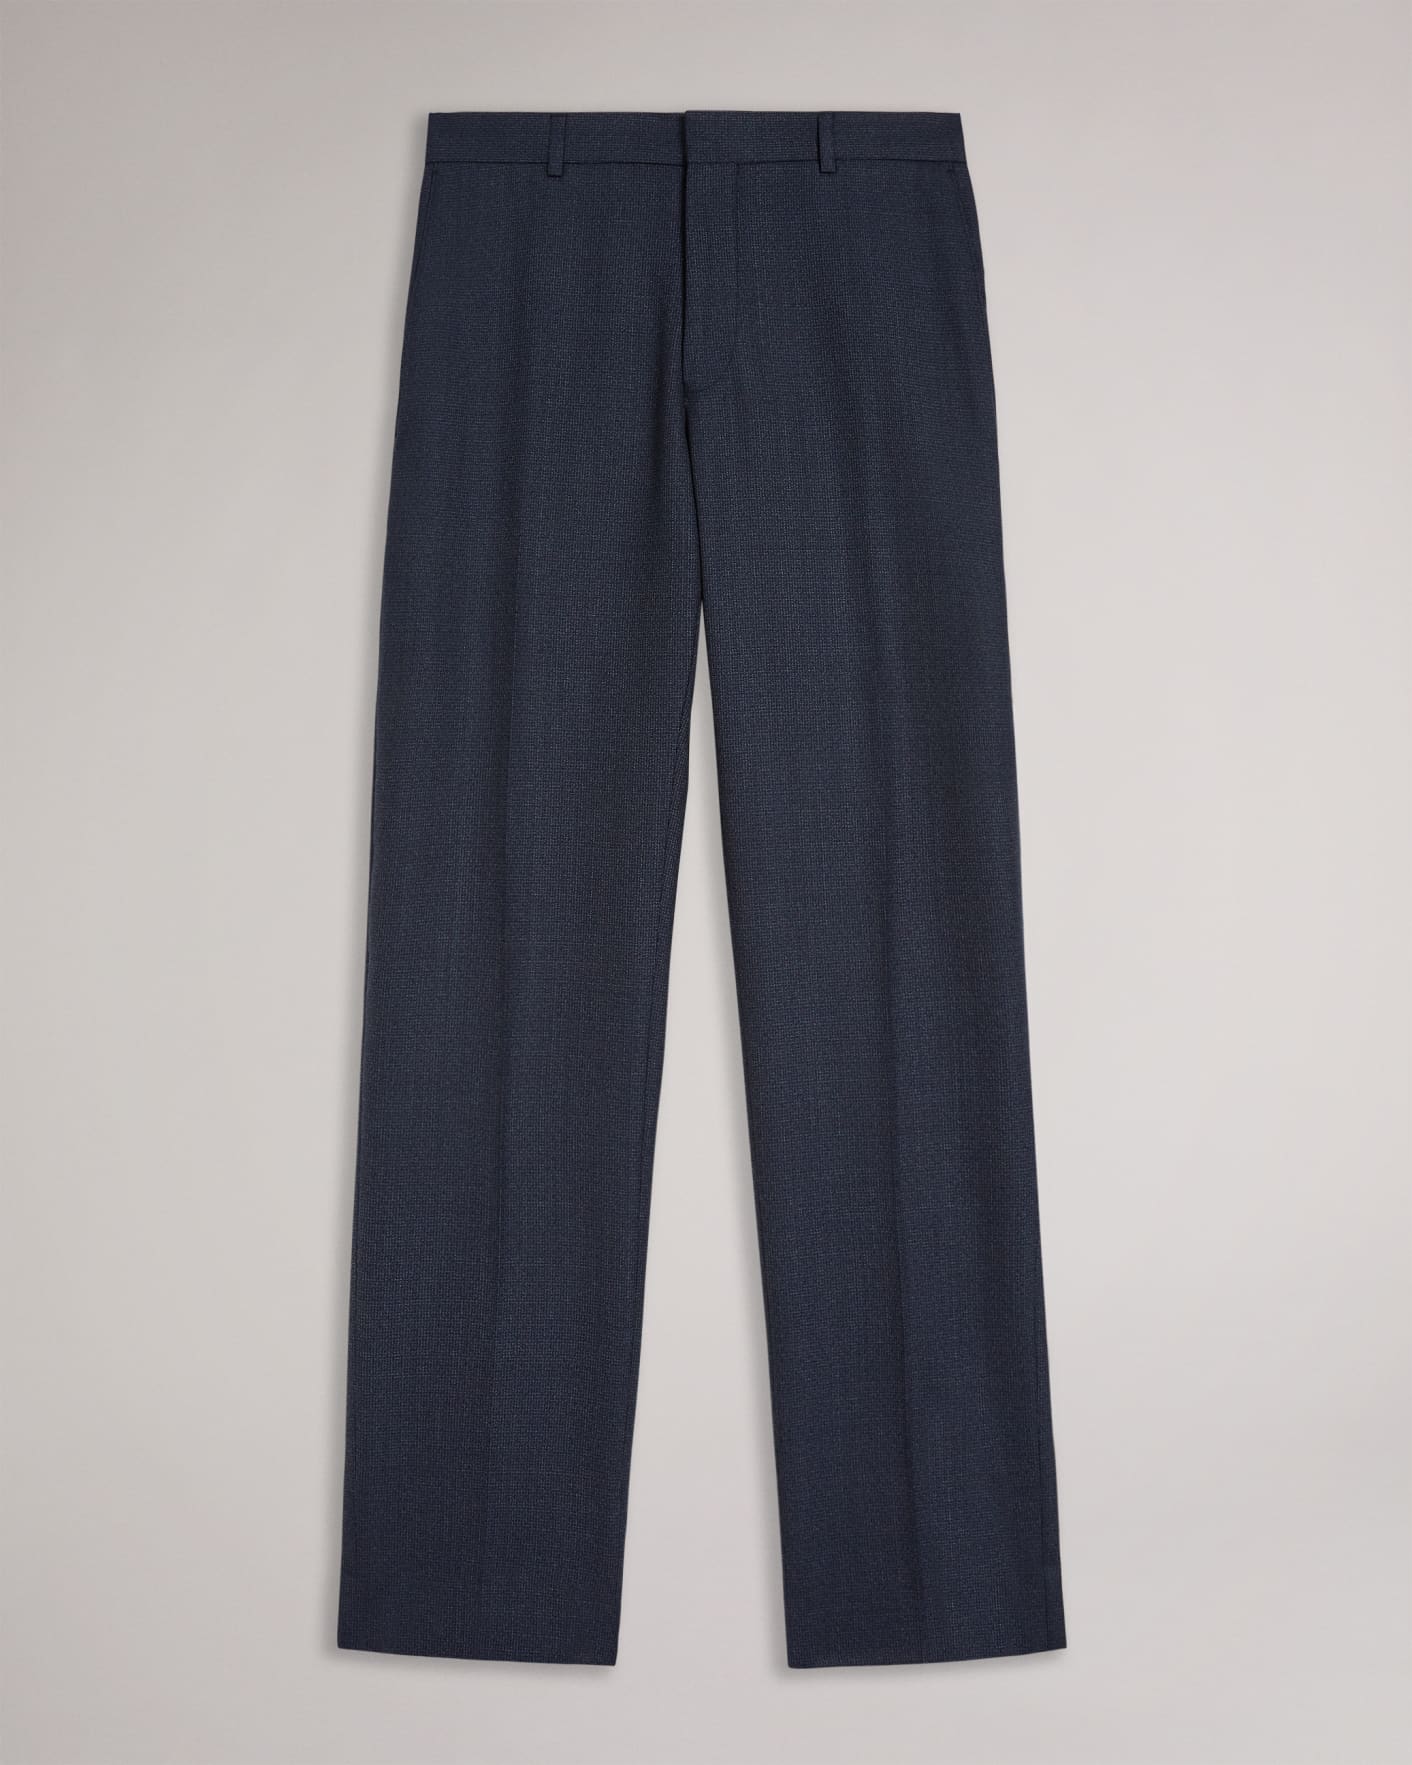 Navy Navy Scratch Slim Fit Suit Trousers Ted Baker